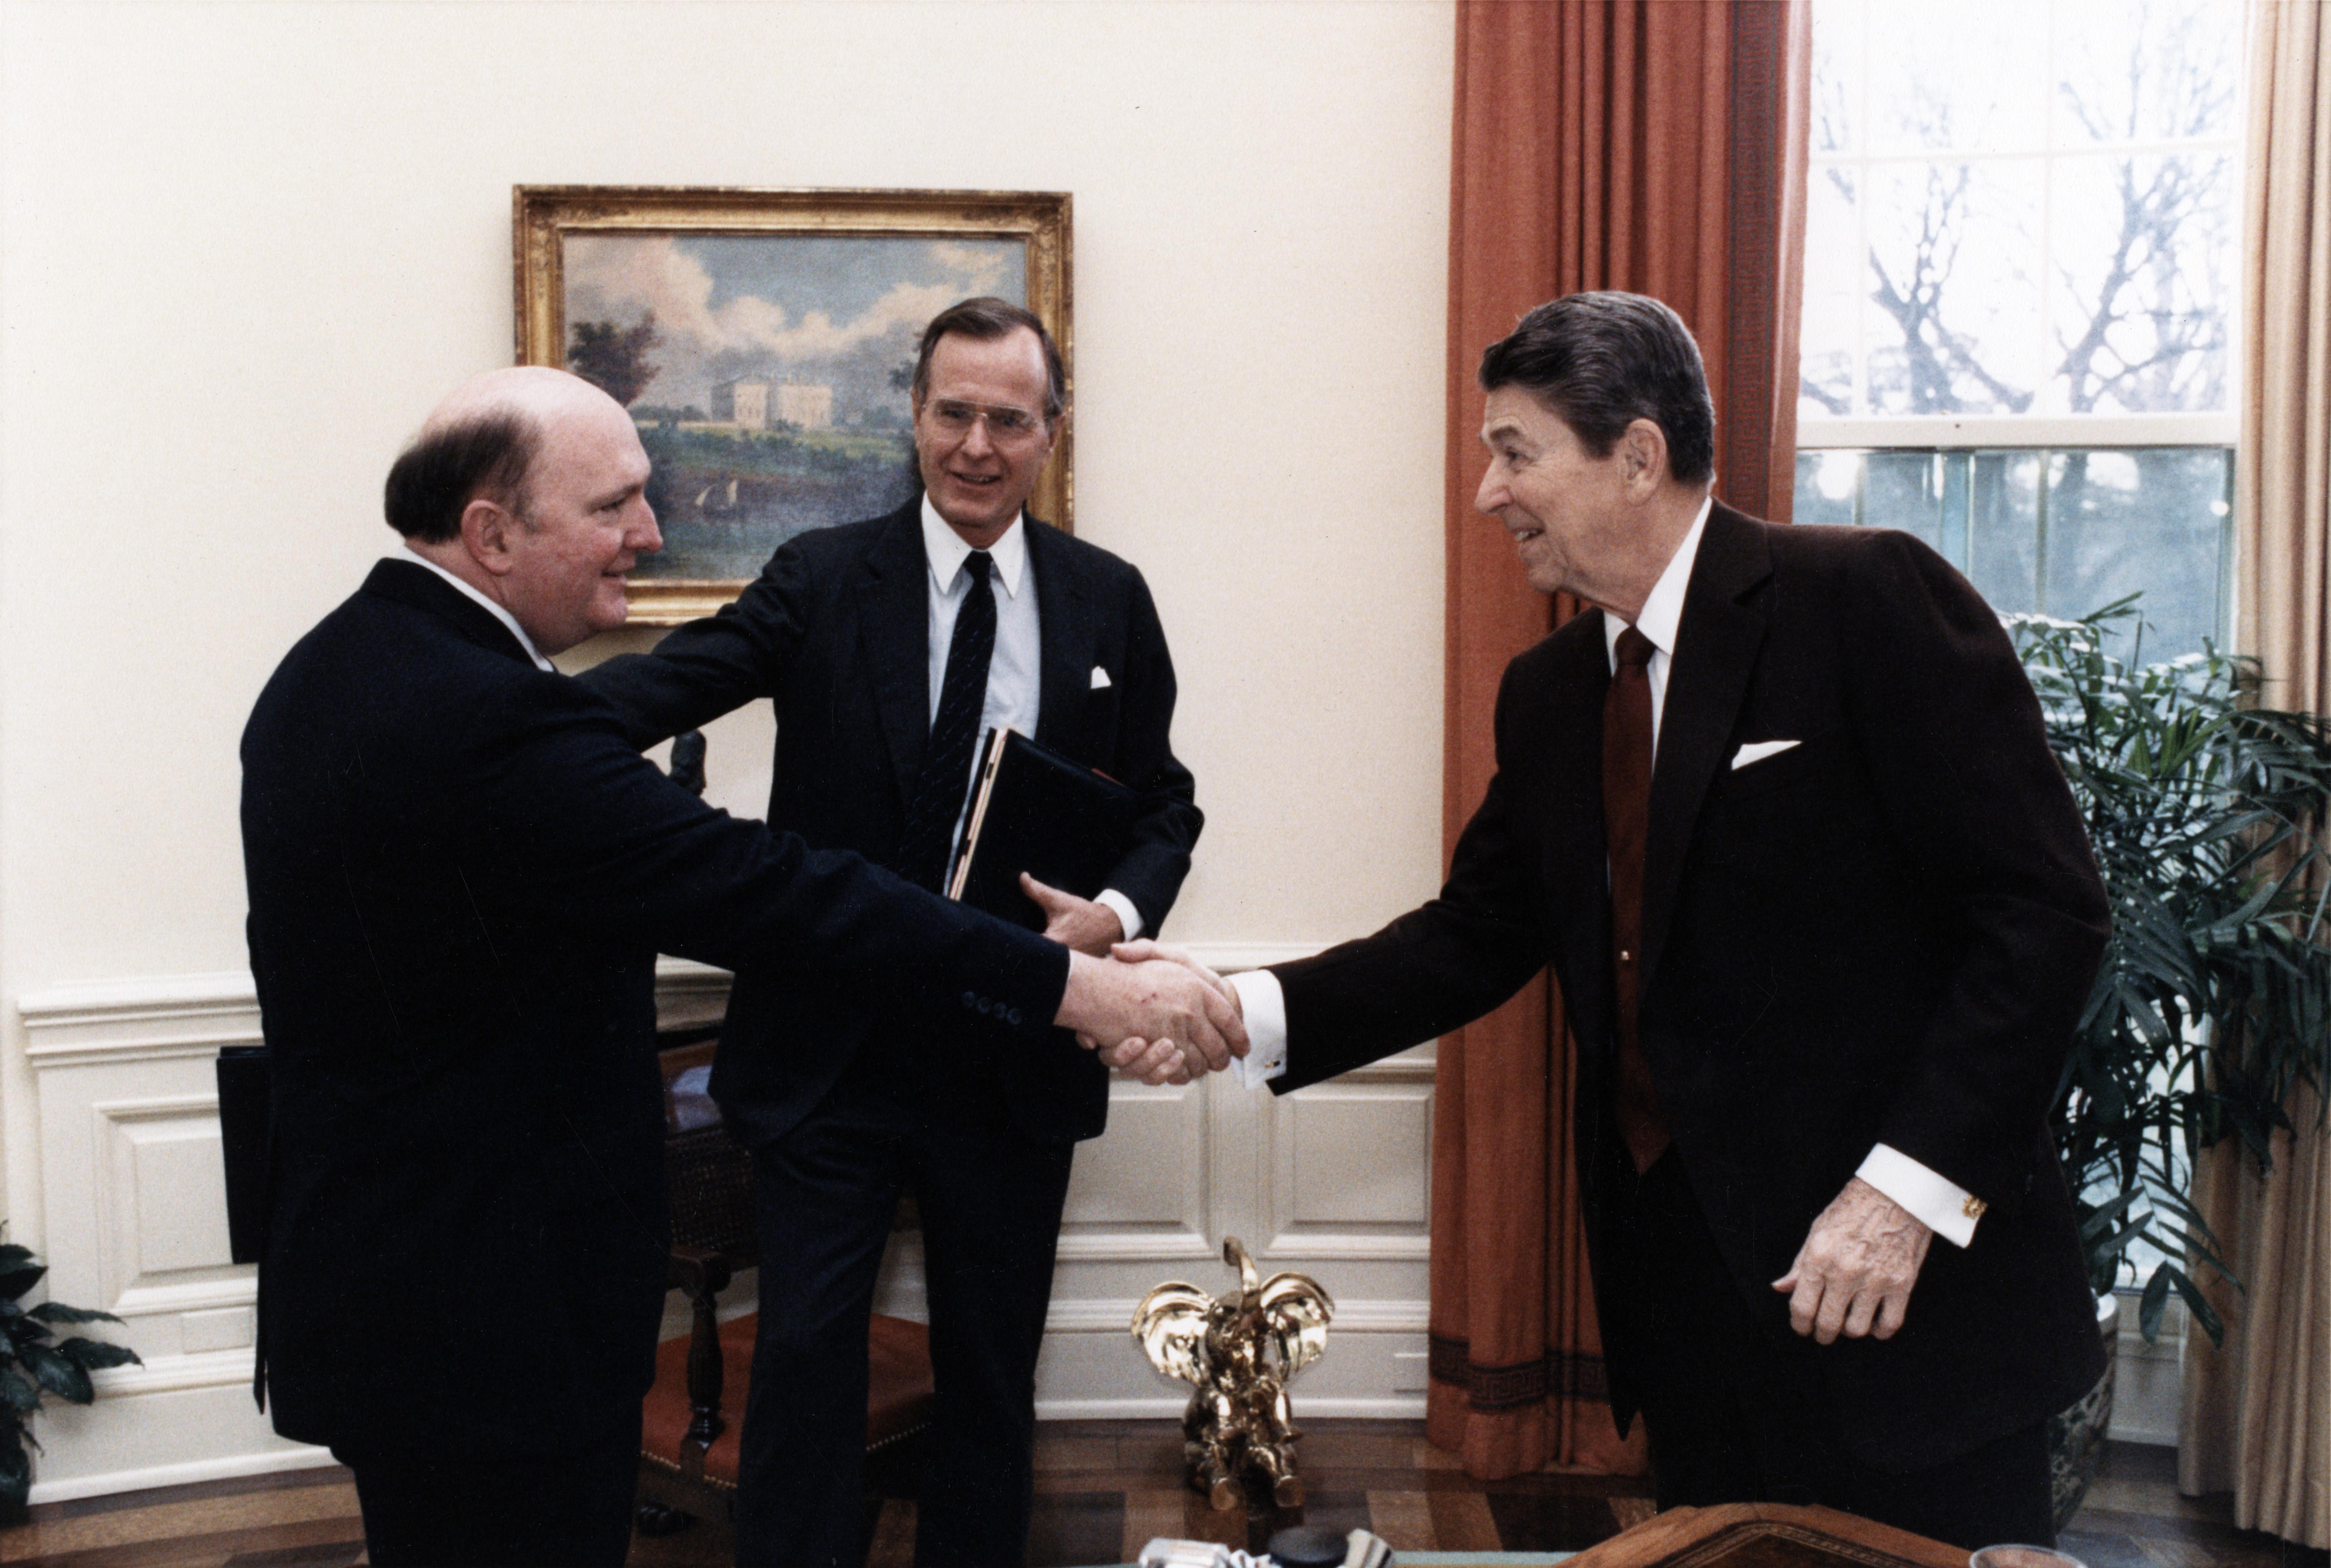 Marlin Fitzwater was serving as Vice President Bush's press secretary in 1987 when President Reagan asked him to serve as his press secretary. According to Fitzwater, "This is the moment when George Bush took me to the Oval Office and said, 'I'm turning him over to you, sir.'"